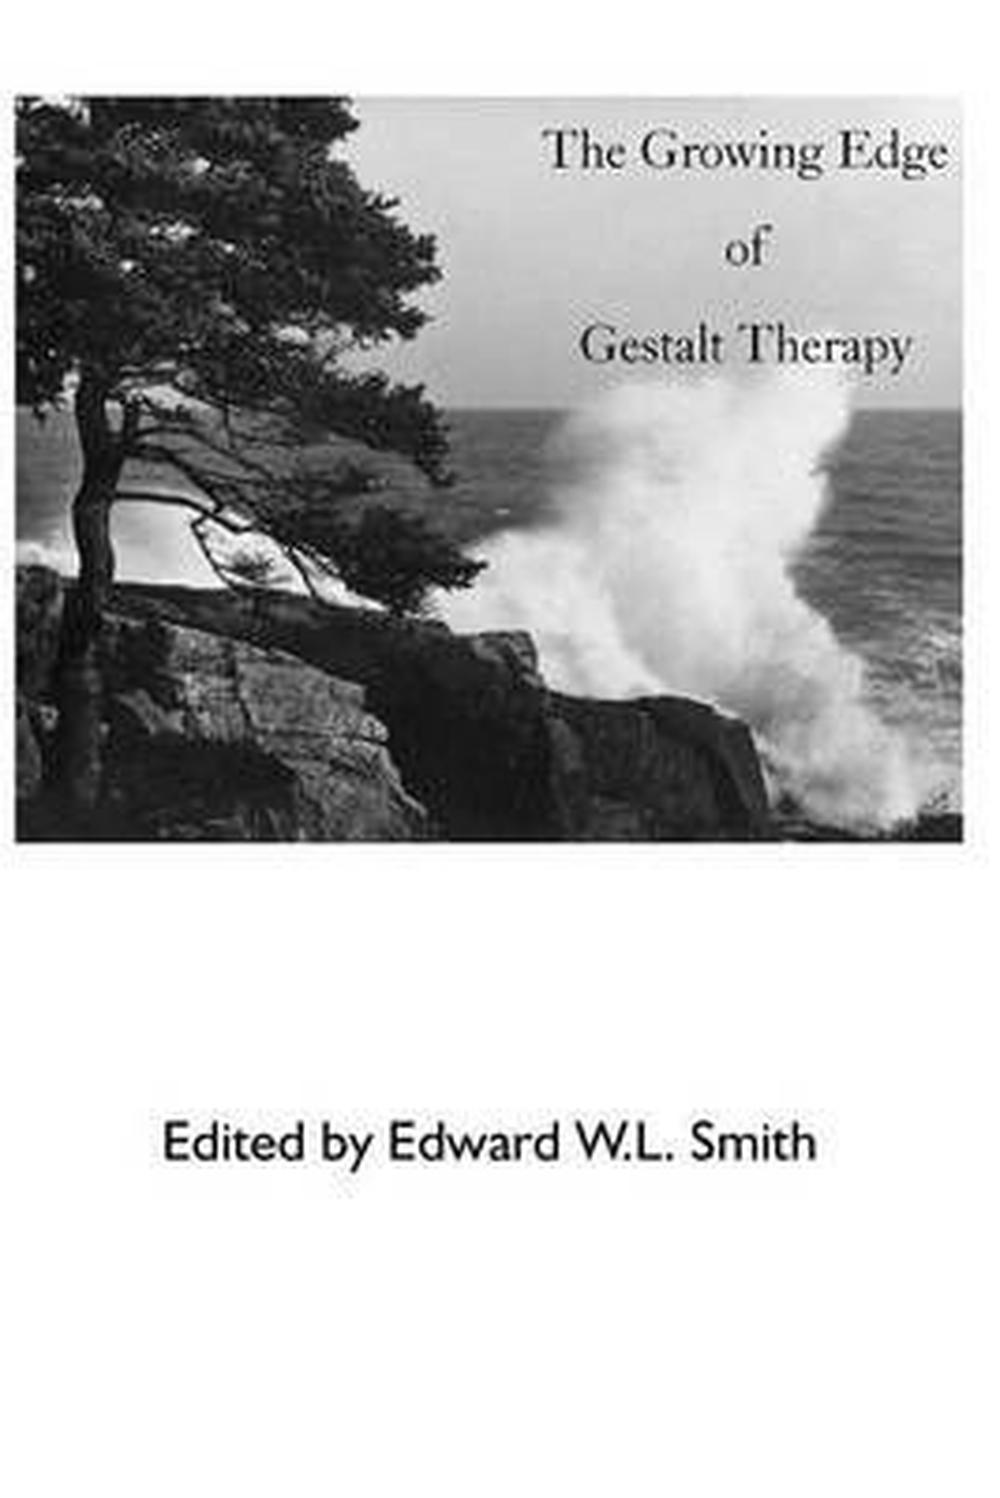 Growing Edge of Gestalt Therapy by Edward, W. L. Smith (English